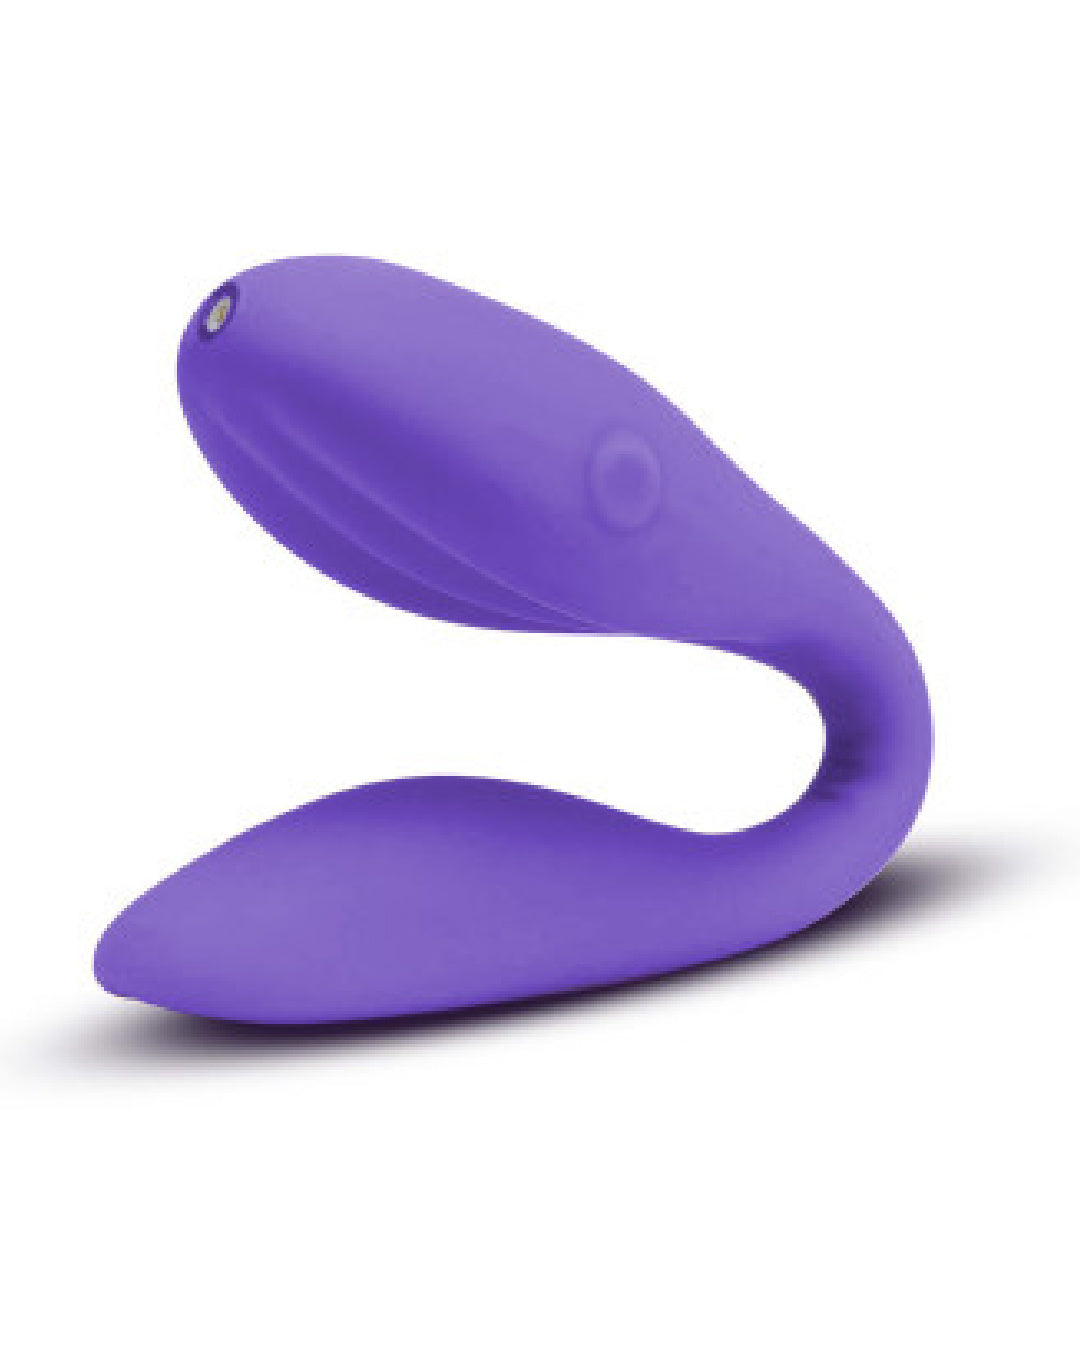 Wellness Duo Couples Vibrator side view 